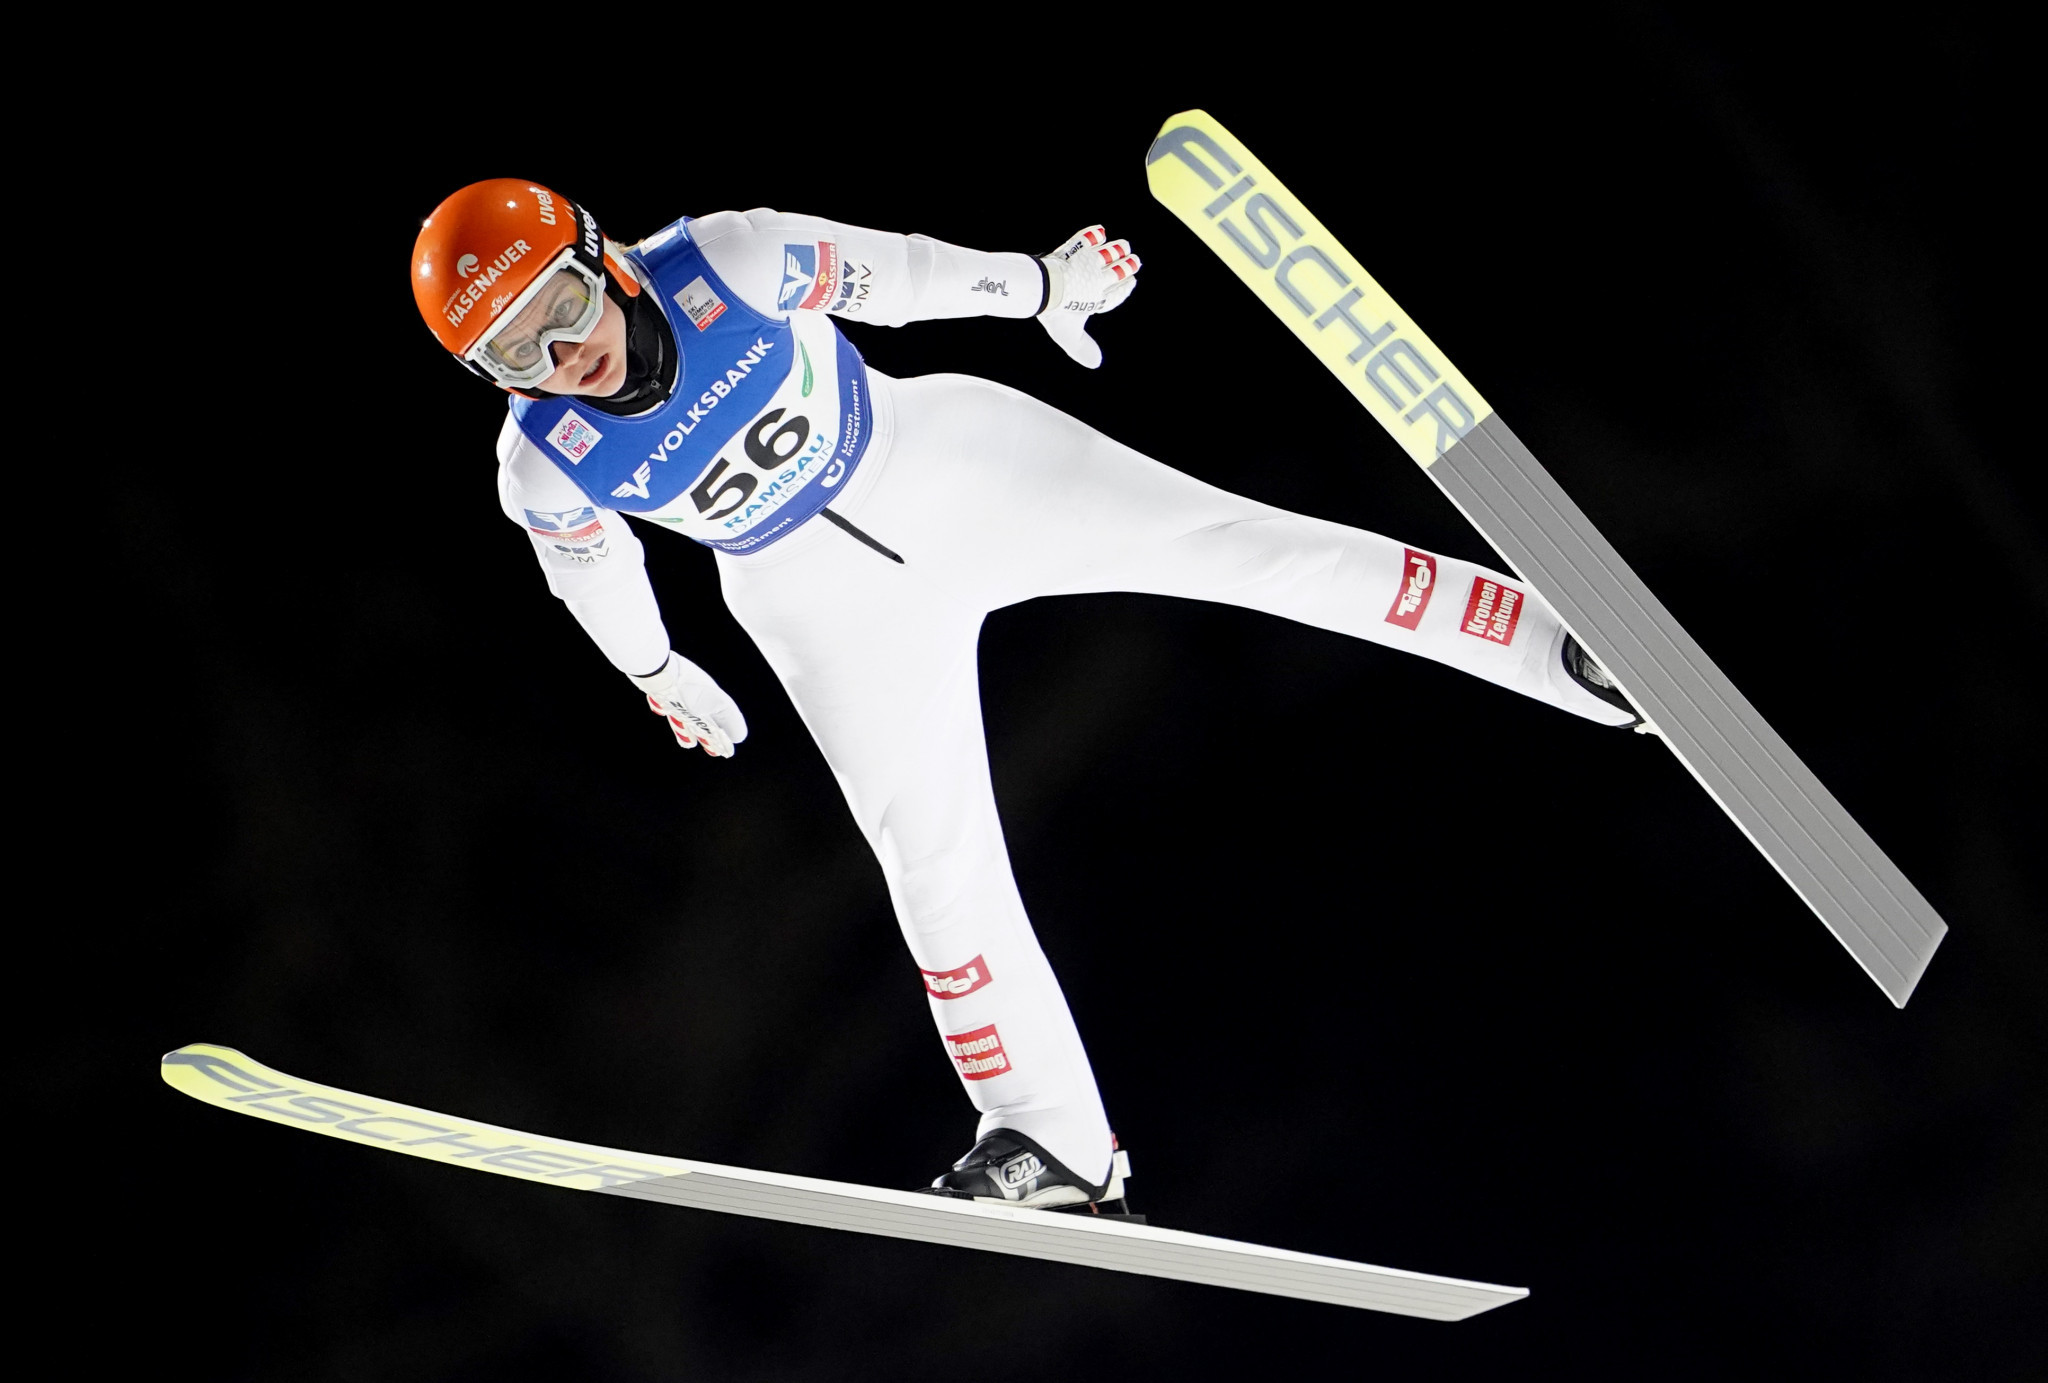 Kramer tops qualification at FIS Women's Ski Jumping World Cup in Ramsau